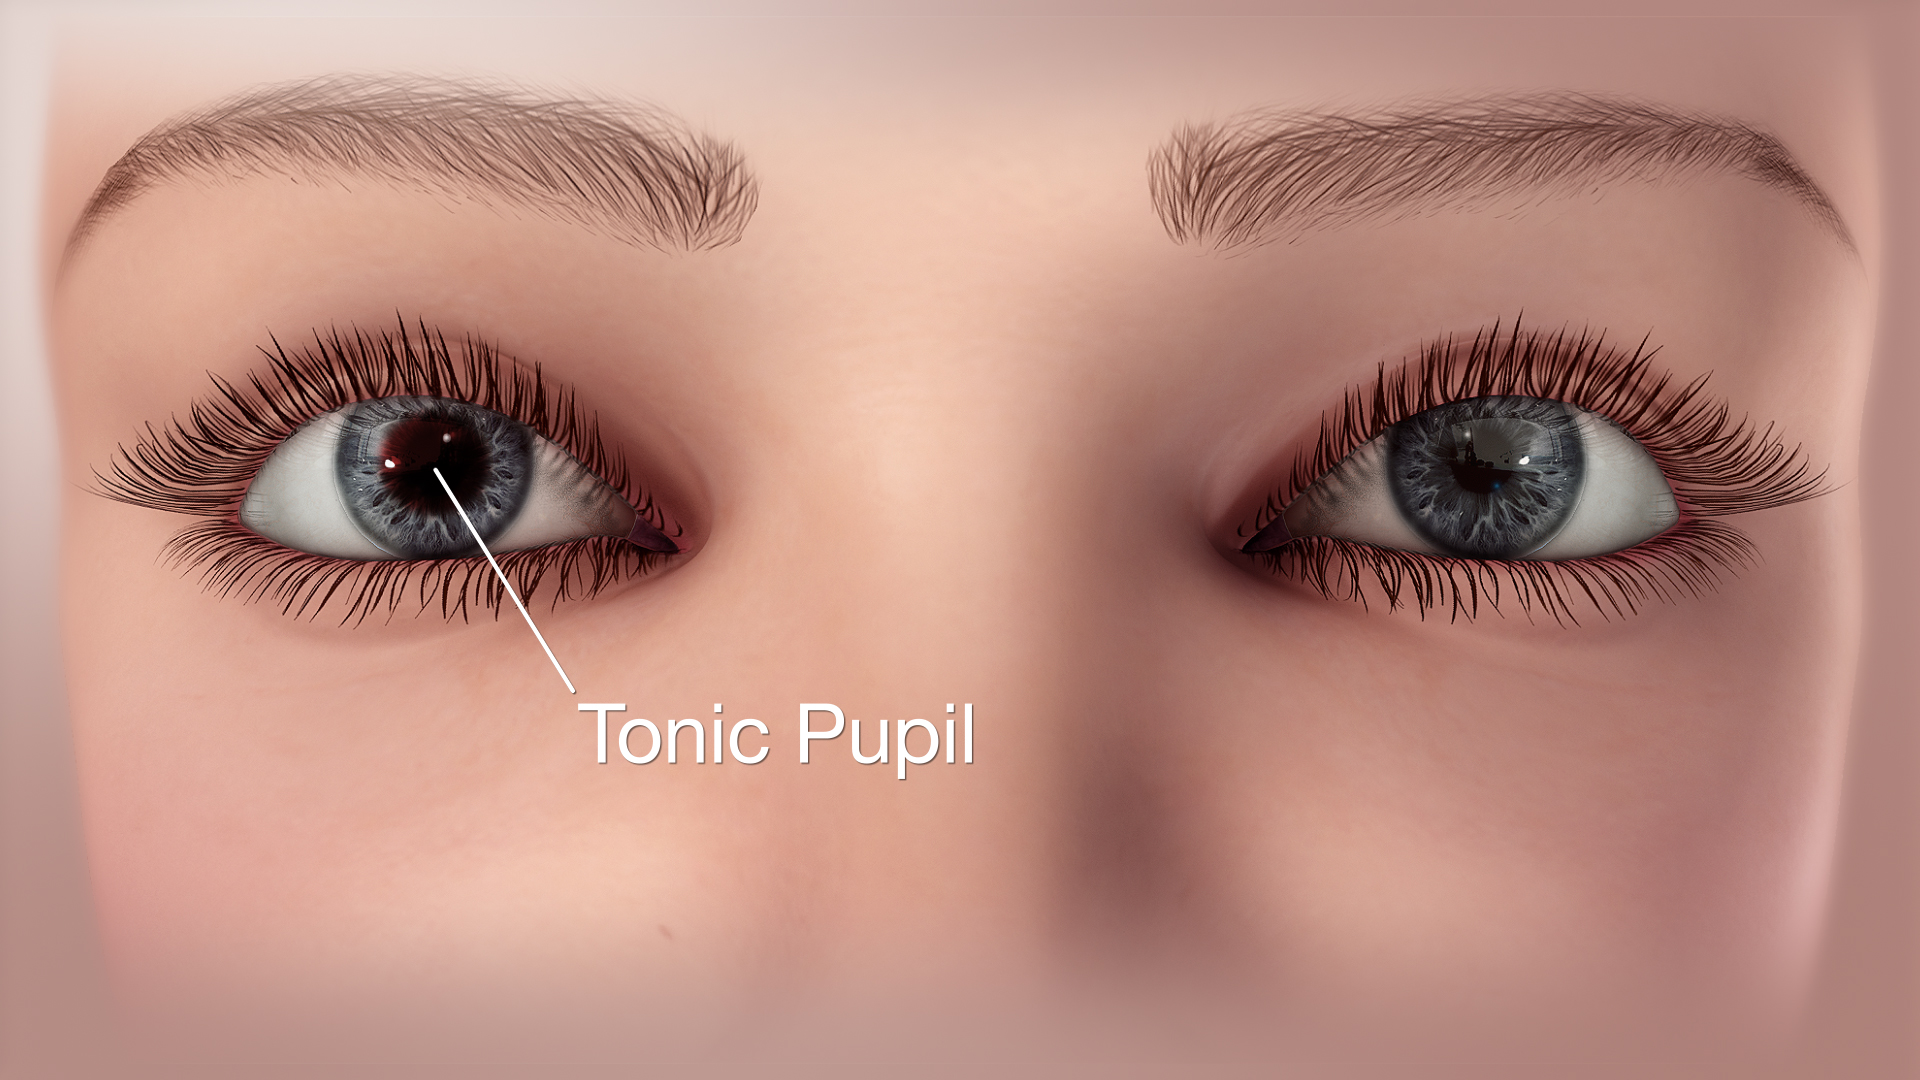 3D Medical Animation Showing Tonic Pupil Syndrome